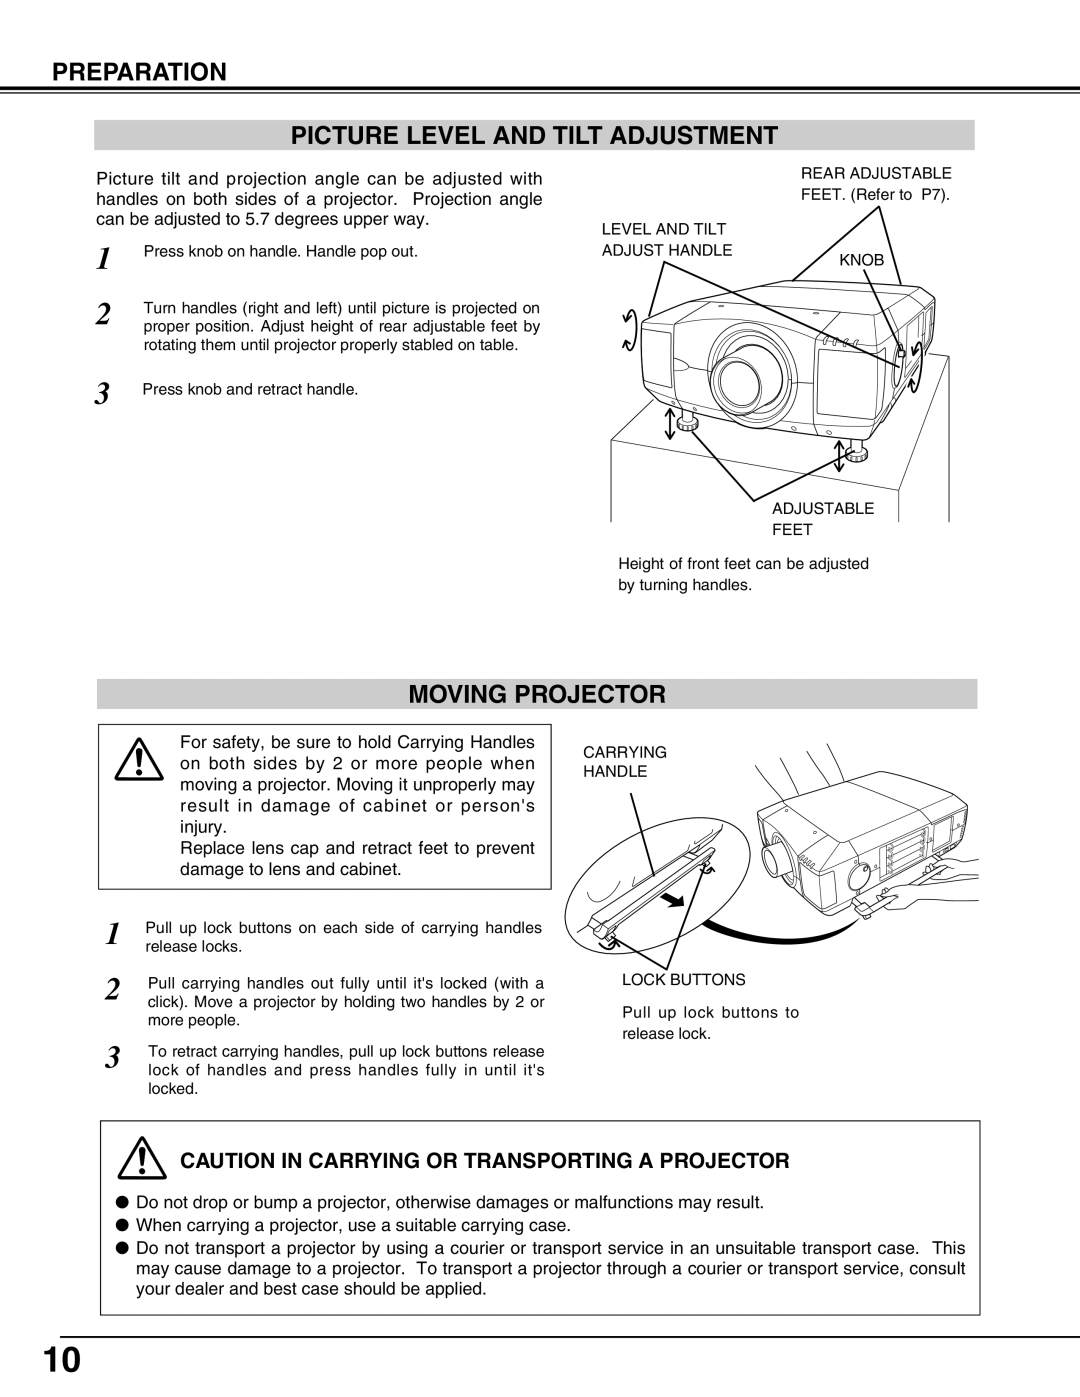 Eiki LC-UXT3 instruction manual Preparation Picture Level And Tilt Adjustment, Moving Projector 